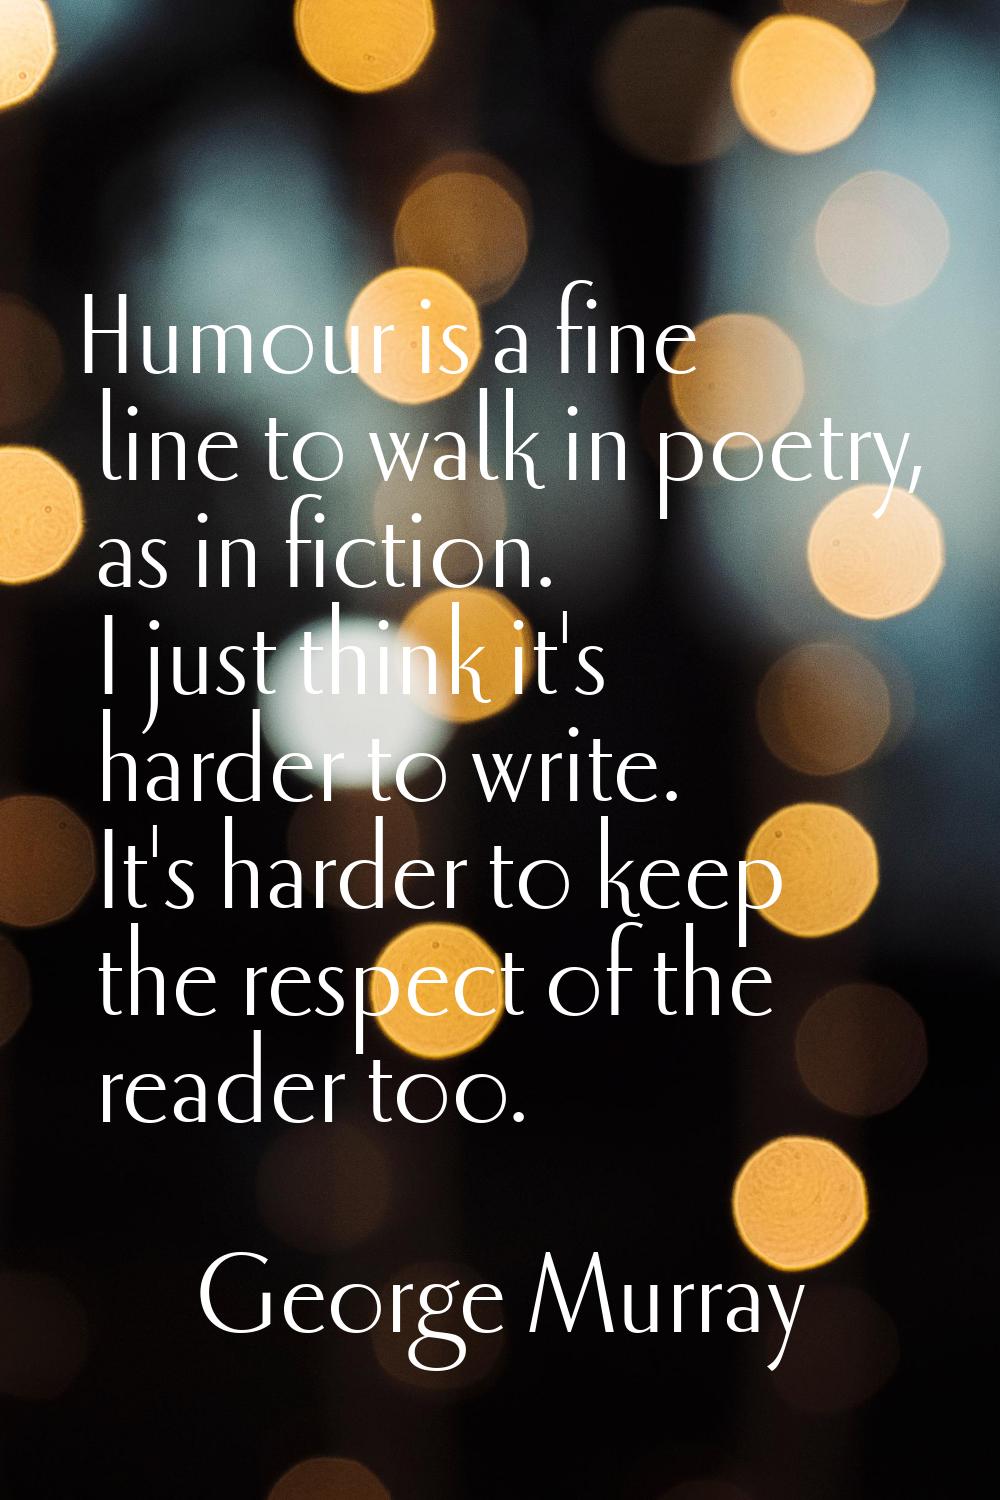 Humour is a fine line to walk in poetry, as in fiction. I just think it's harder to write. It's har